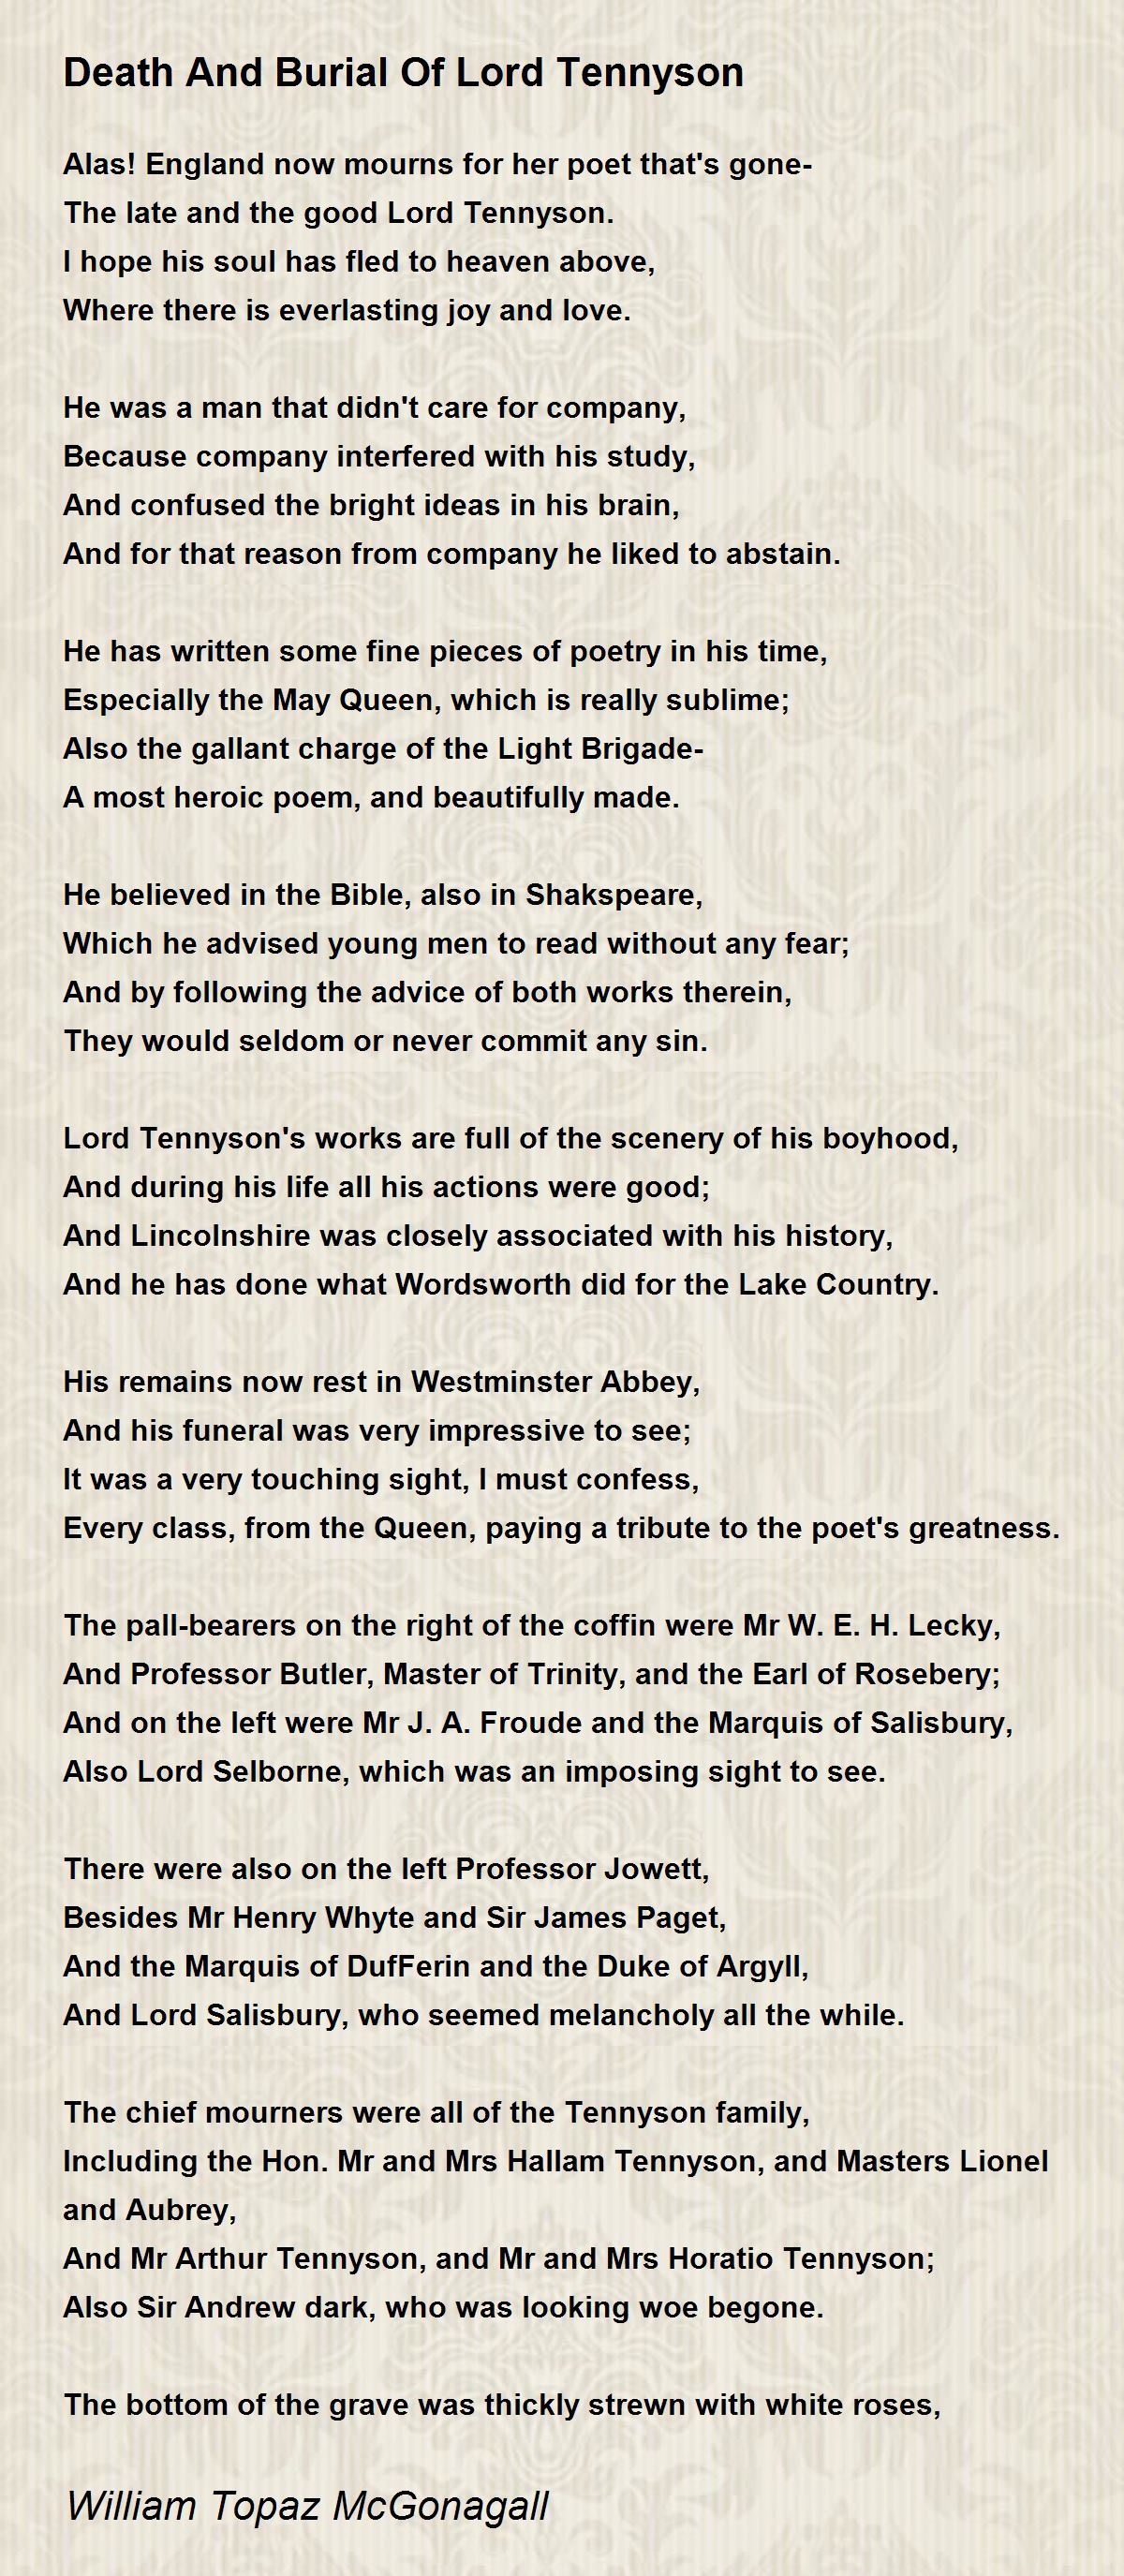 Death And Burial Of Lord Tennyson - Death And Burial Of Lord Tennyson ...